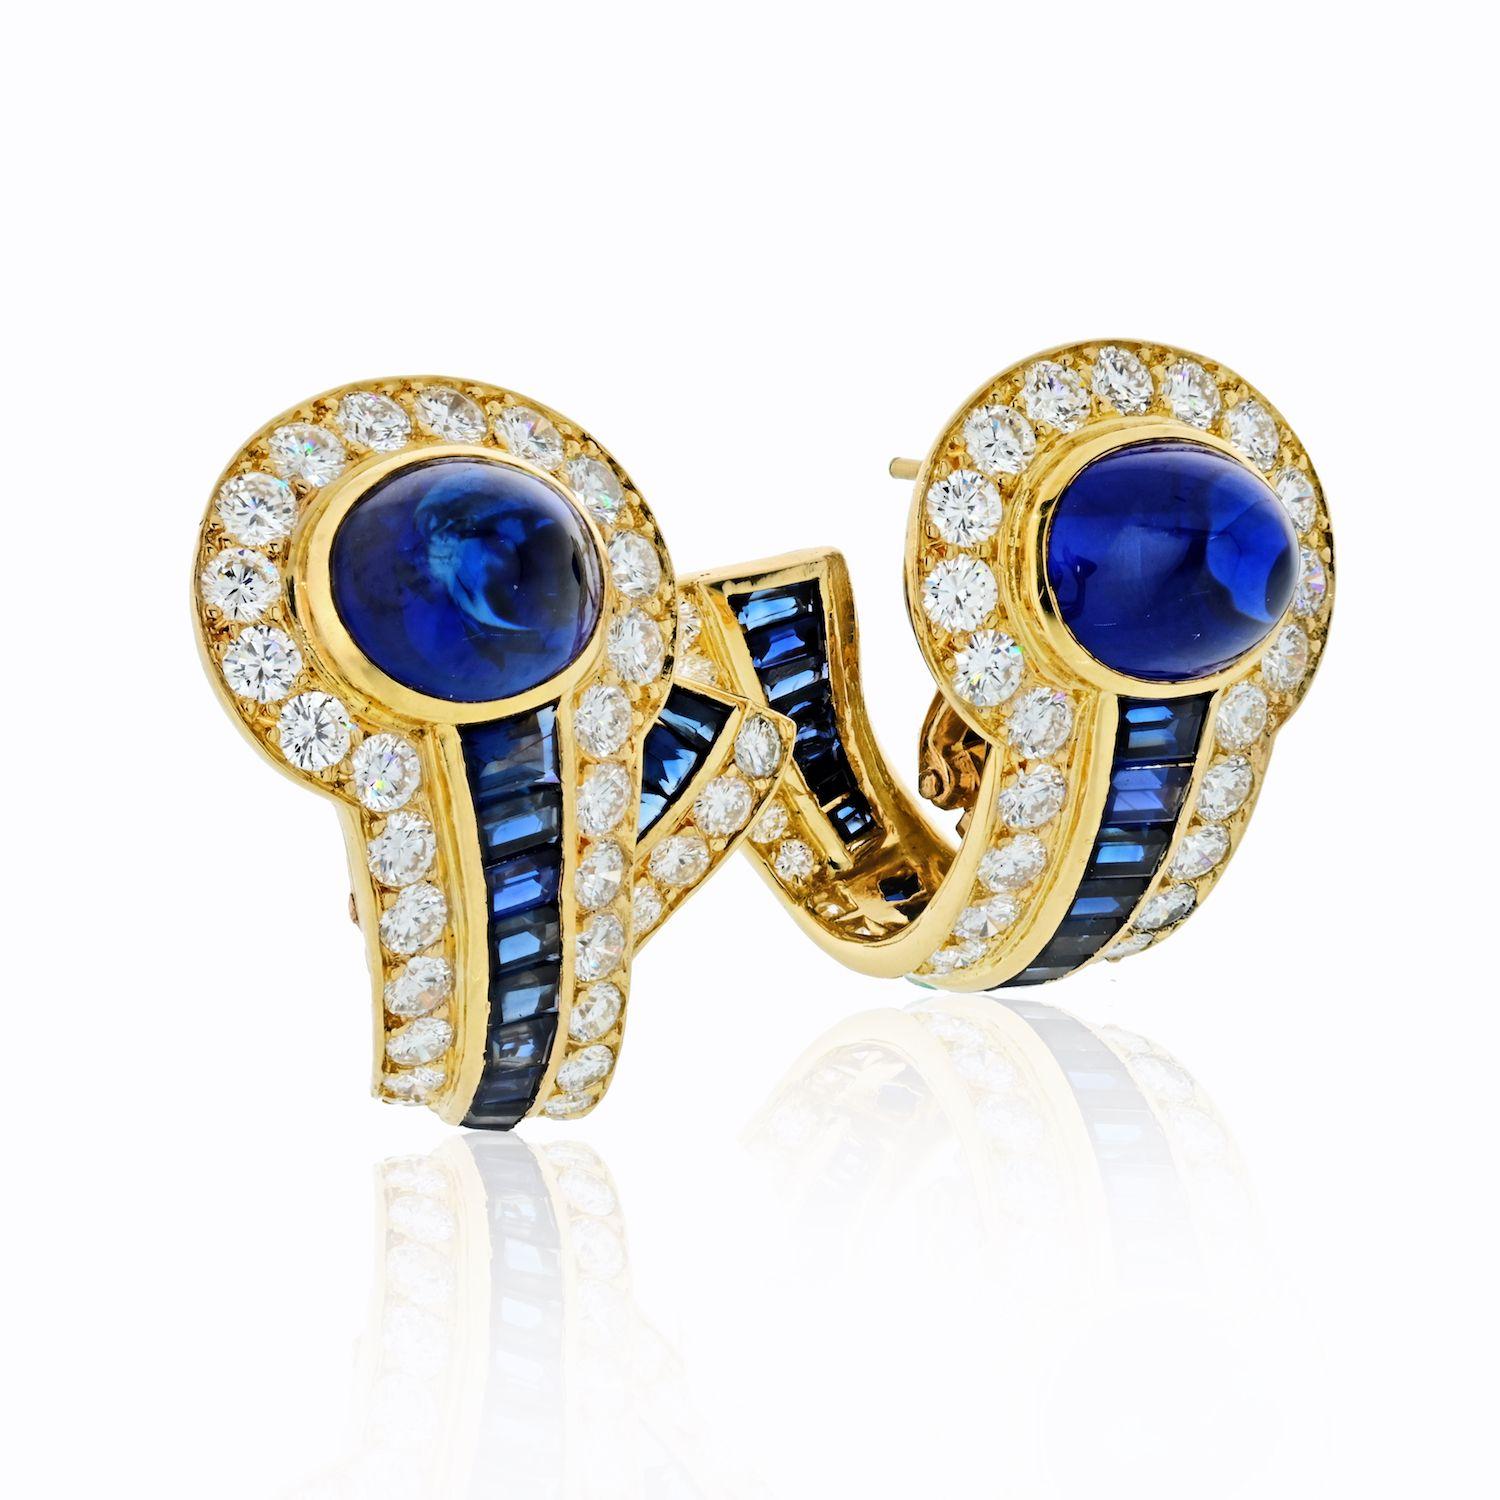 A pair of blue sapphire and diamond earrings mounted in yellow gold made by Boucheron.
These stylish earrings from the 70s are set with round-cut diamonds (F-G/VVS) and blue cabochon and baguette sapphires.
Finished with post backings for pierced